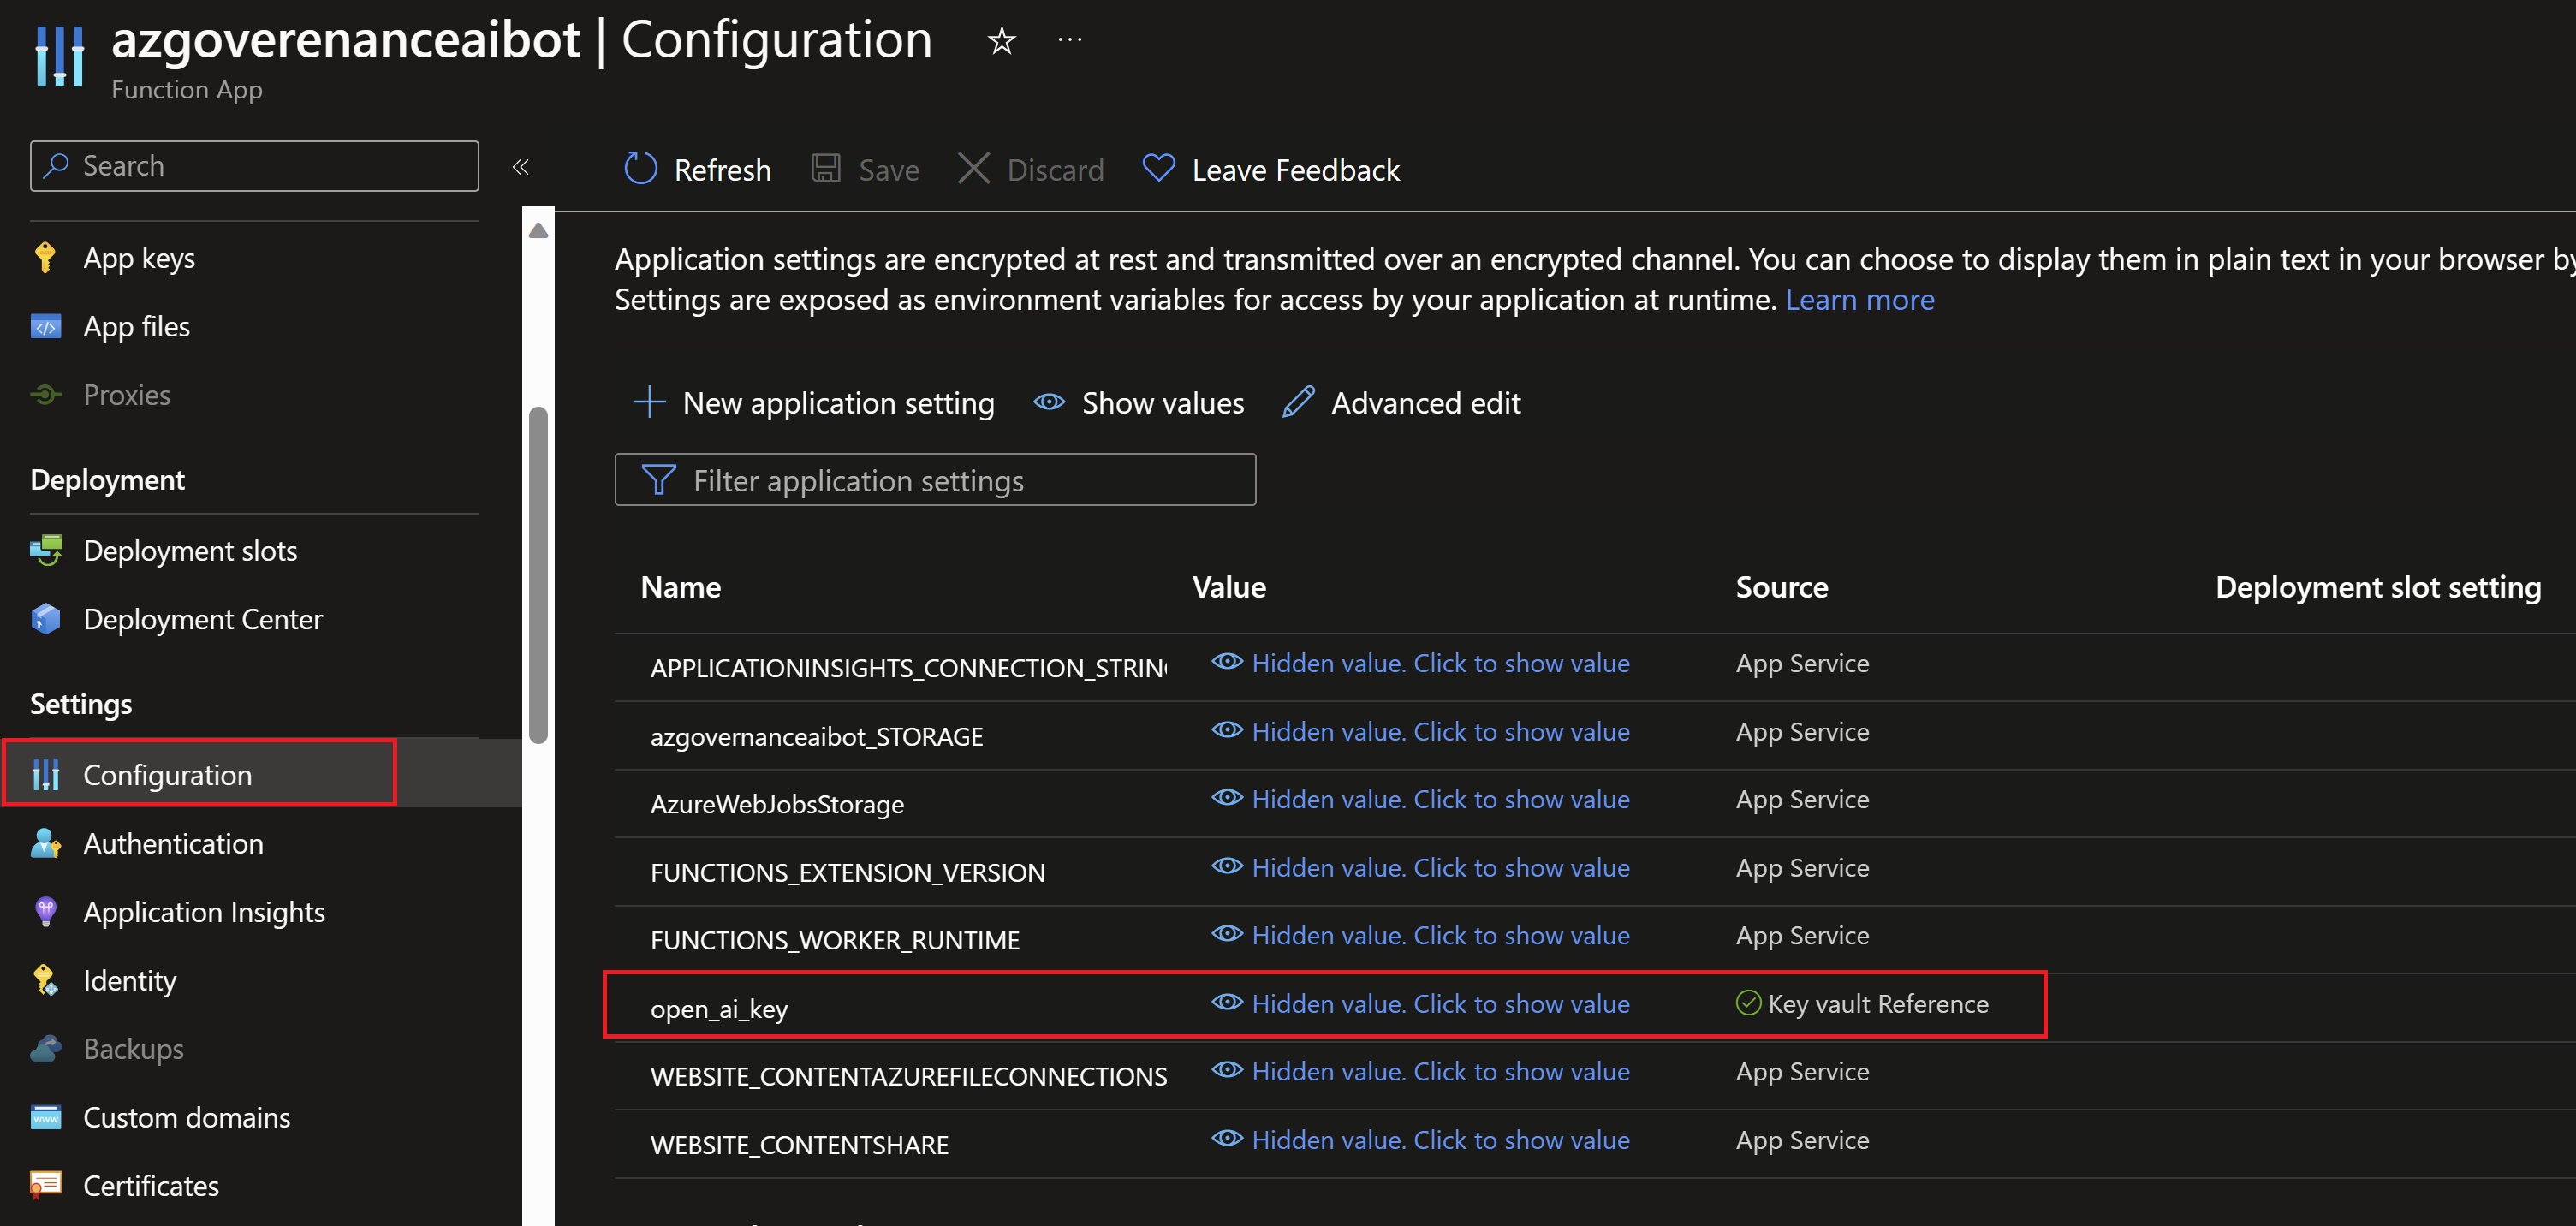 Screenshot showing the azure function key vault reference